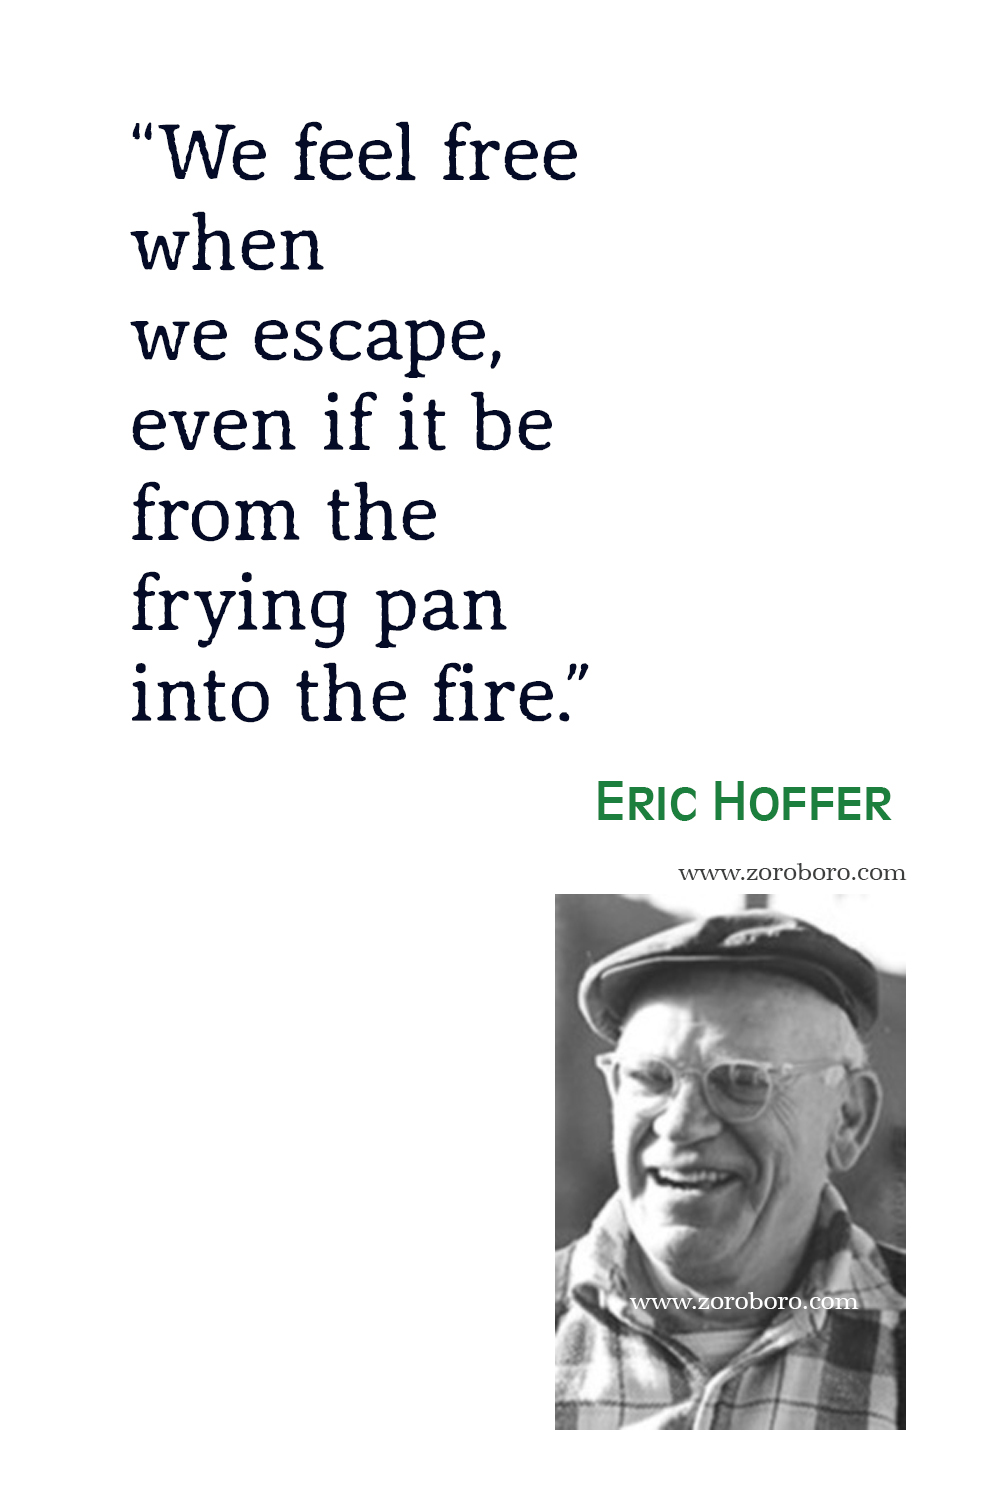 Eric Hoffer Quotes, Eric Hoffer The True Believer Quotes, Eric Hoffer The Passionate State of Mind Quotes, Eric Hoffer Books, Eric Hoffer The Loudest When We.